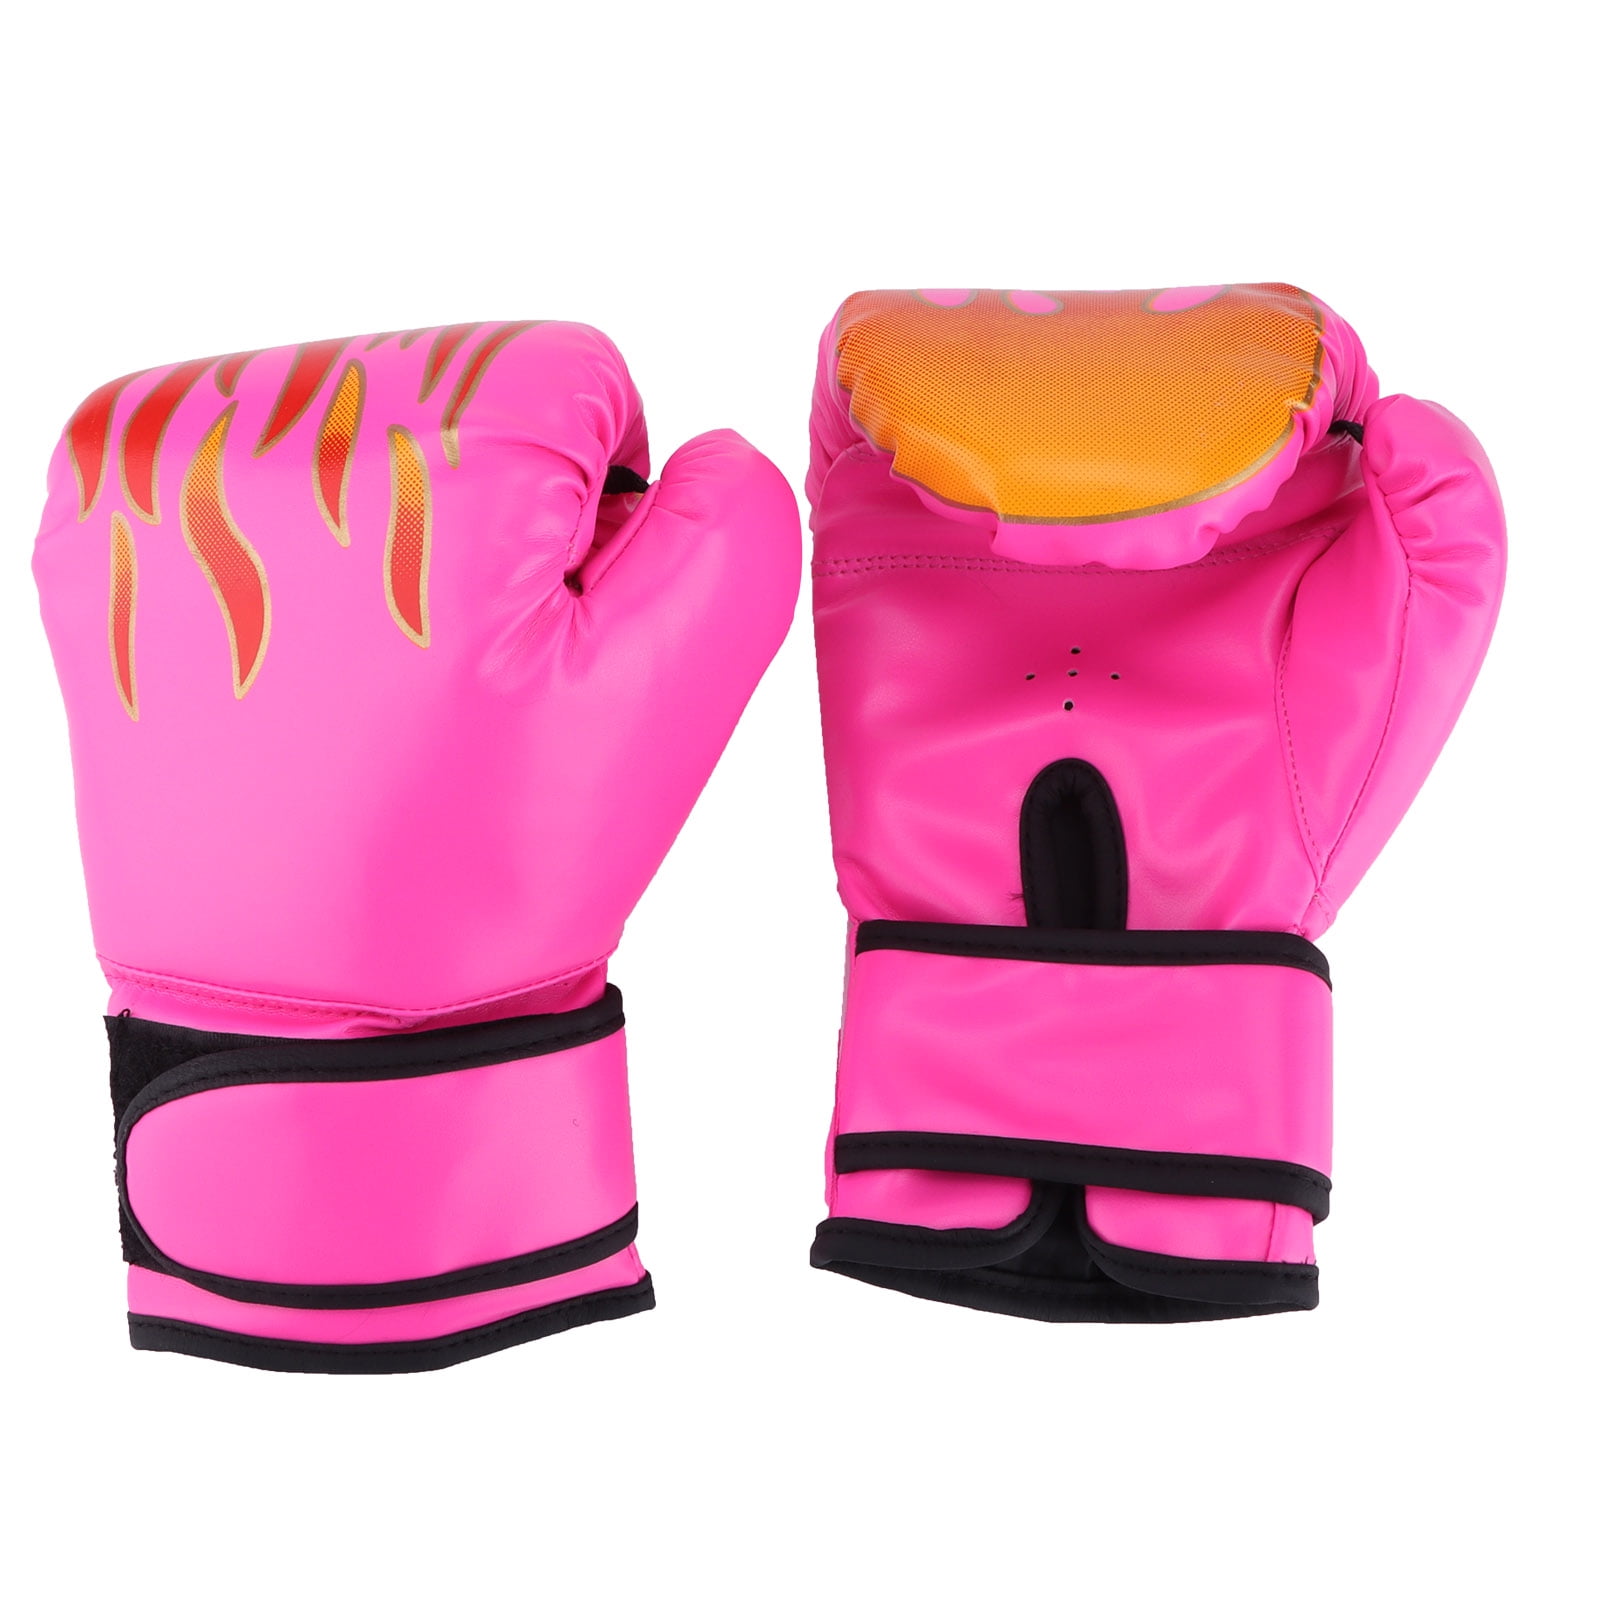 1 pairs Kids adults Boxing Gloves Sparring Training Muay Thai Gloves Junior 